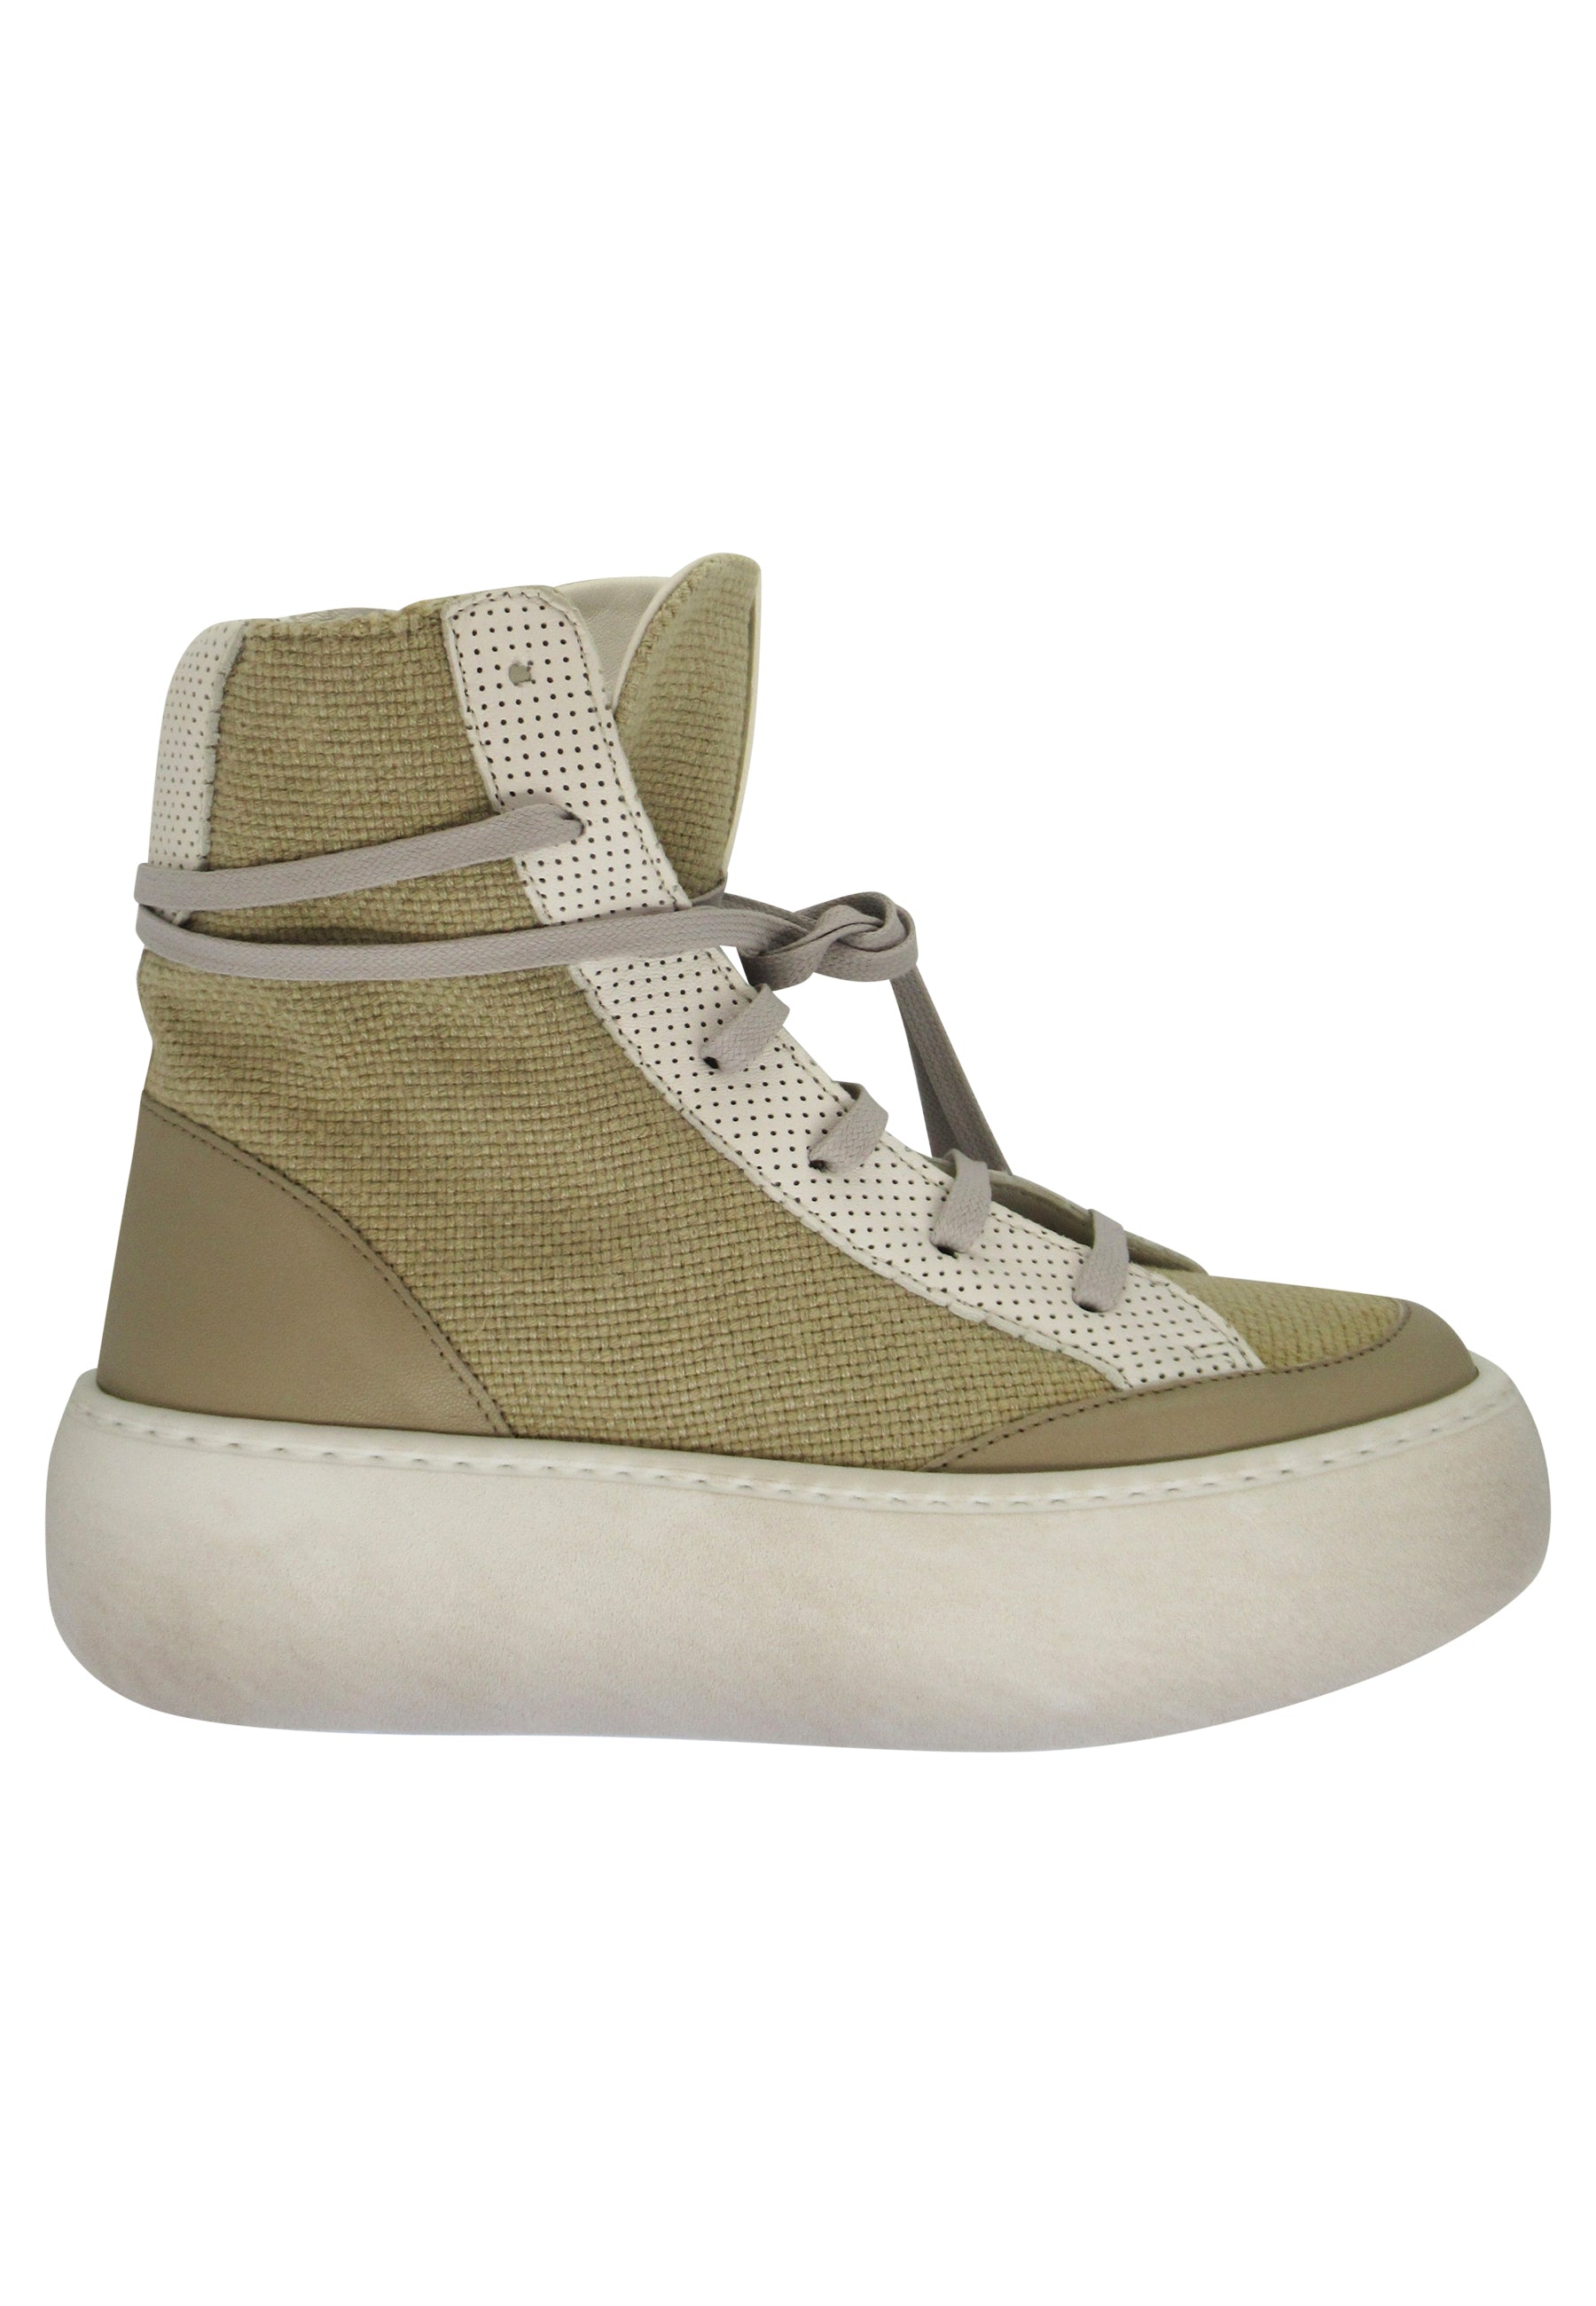 Women's ankle-boot sneakers in natural fabric and off-white leather with wedge